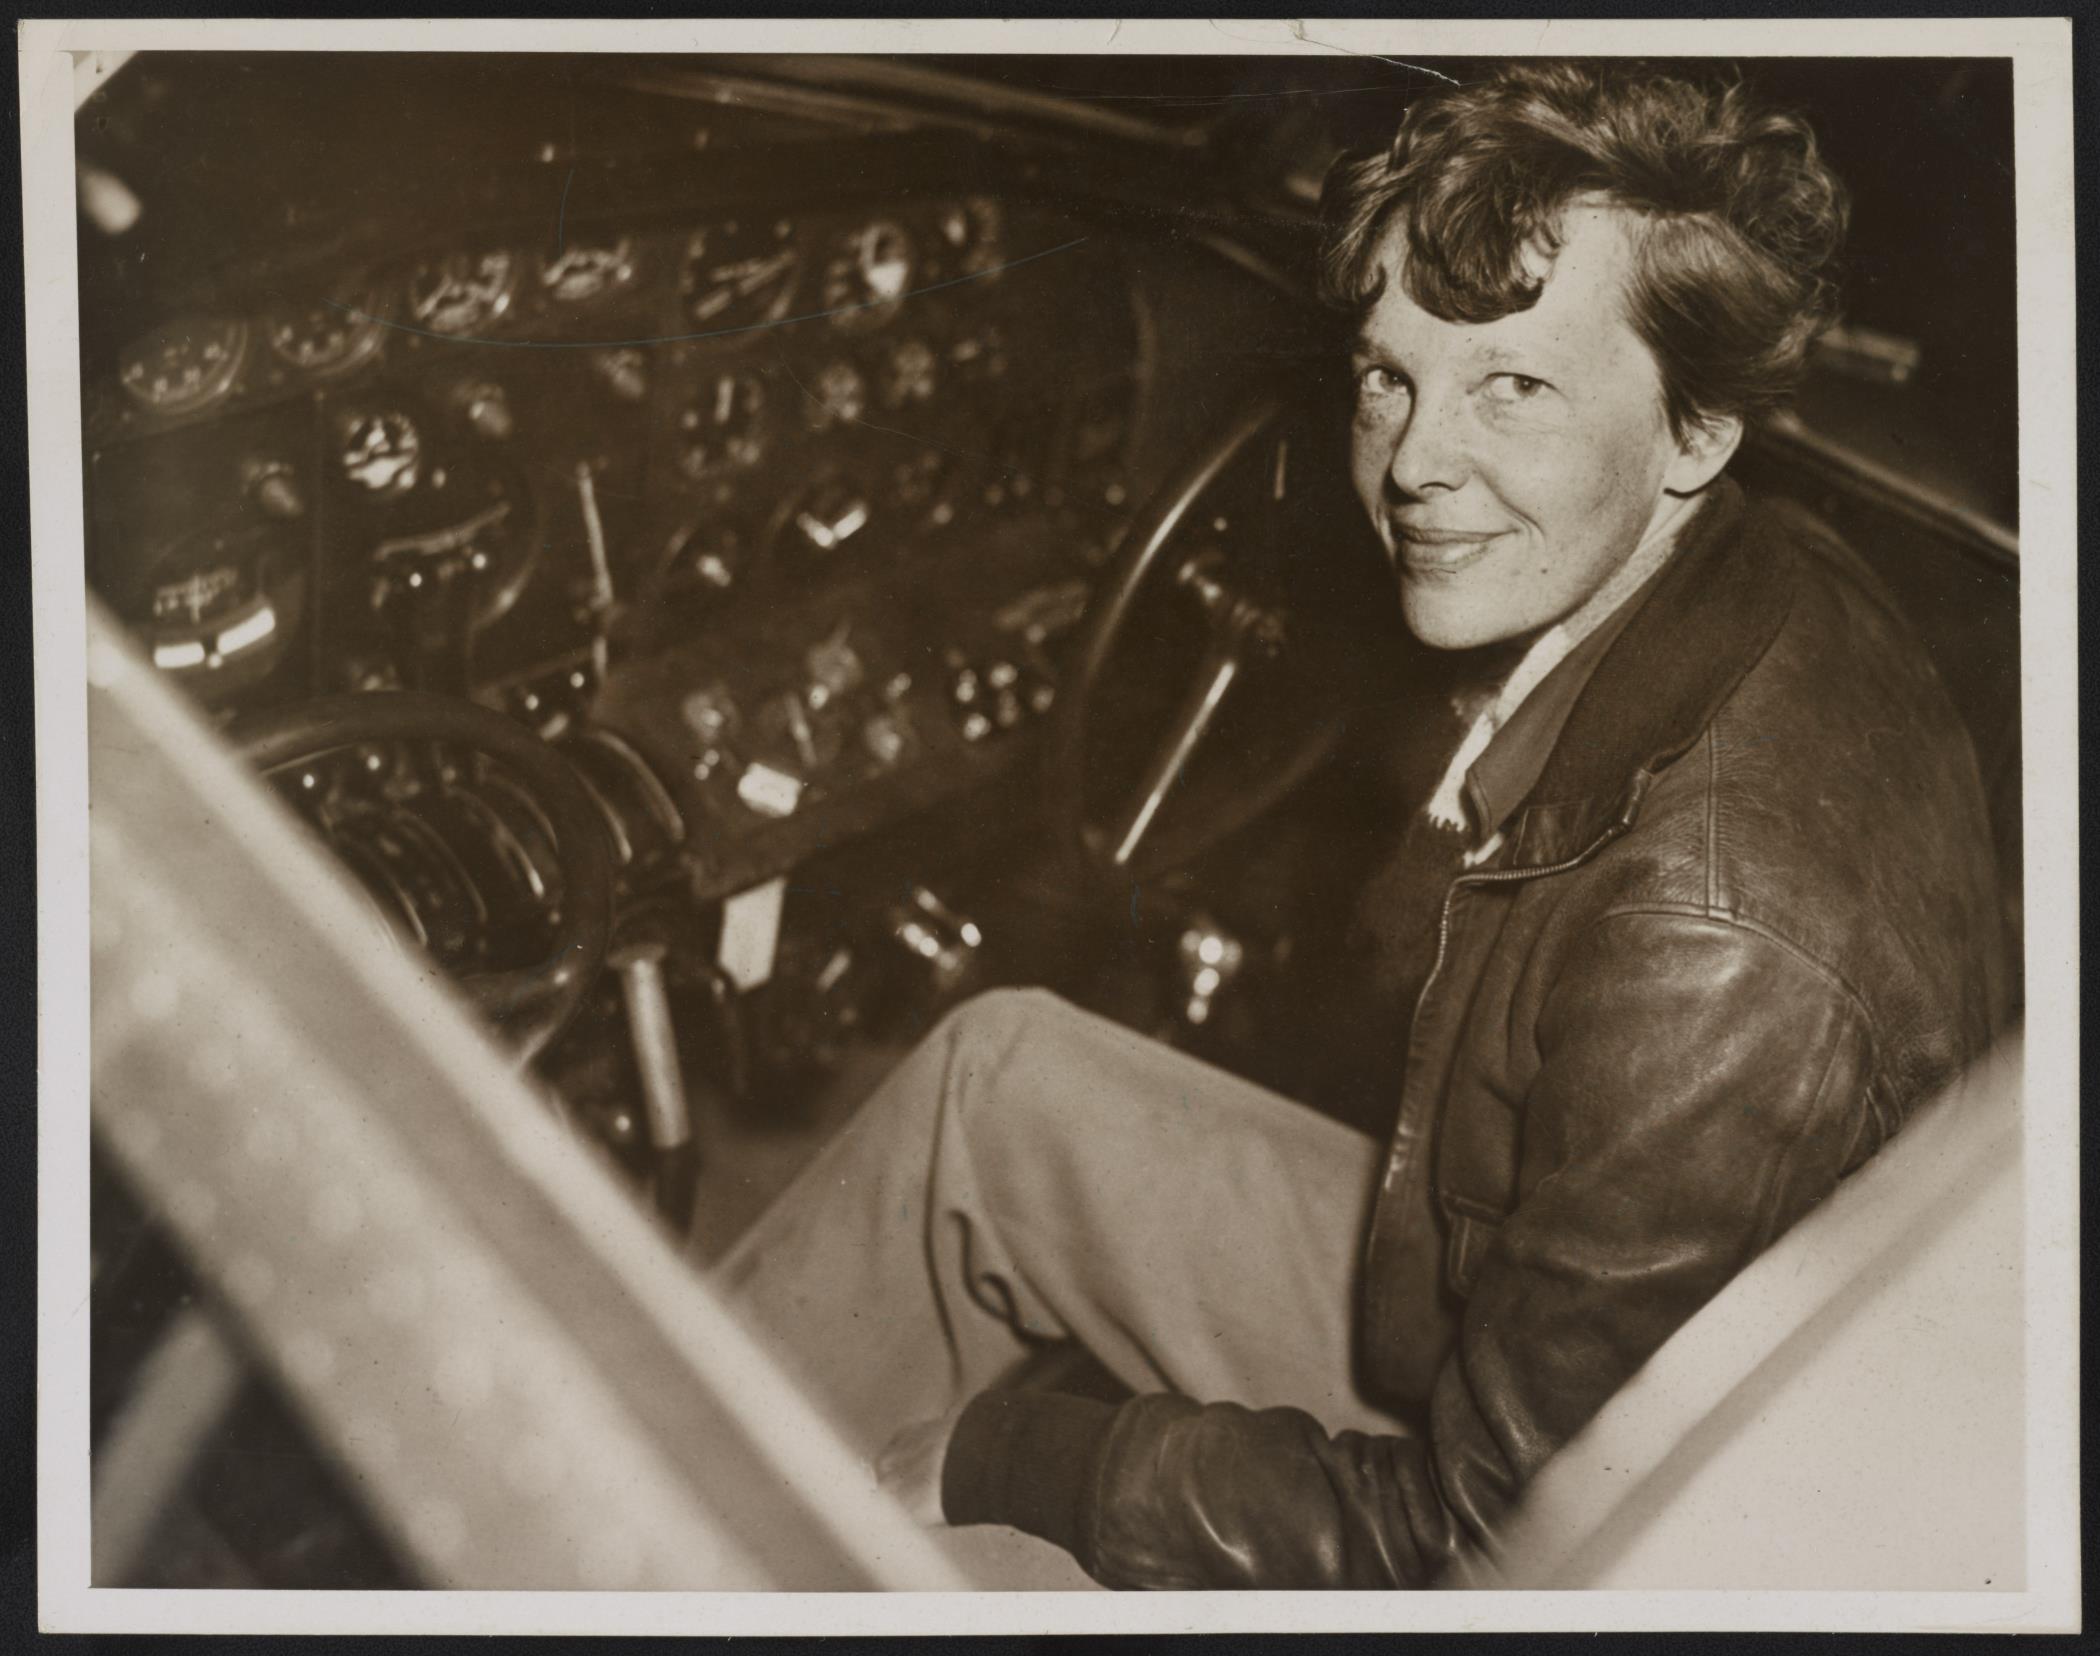 Amelia Earhart: Una Vita In Volo su National Geographic [credit: Library of Congress; courtesy of Fox Networks Group Italy]